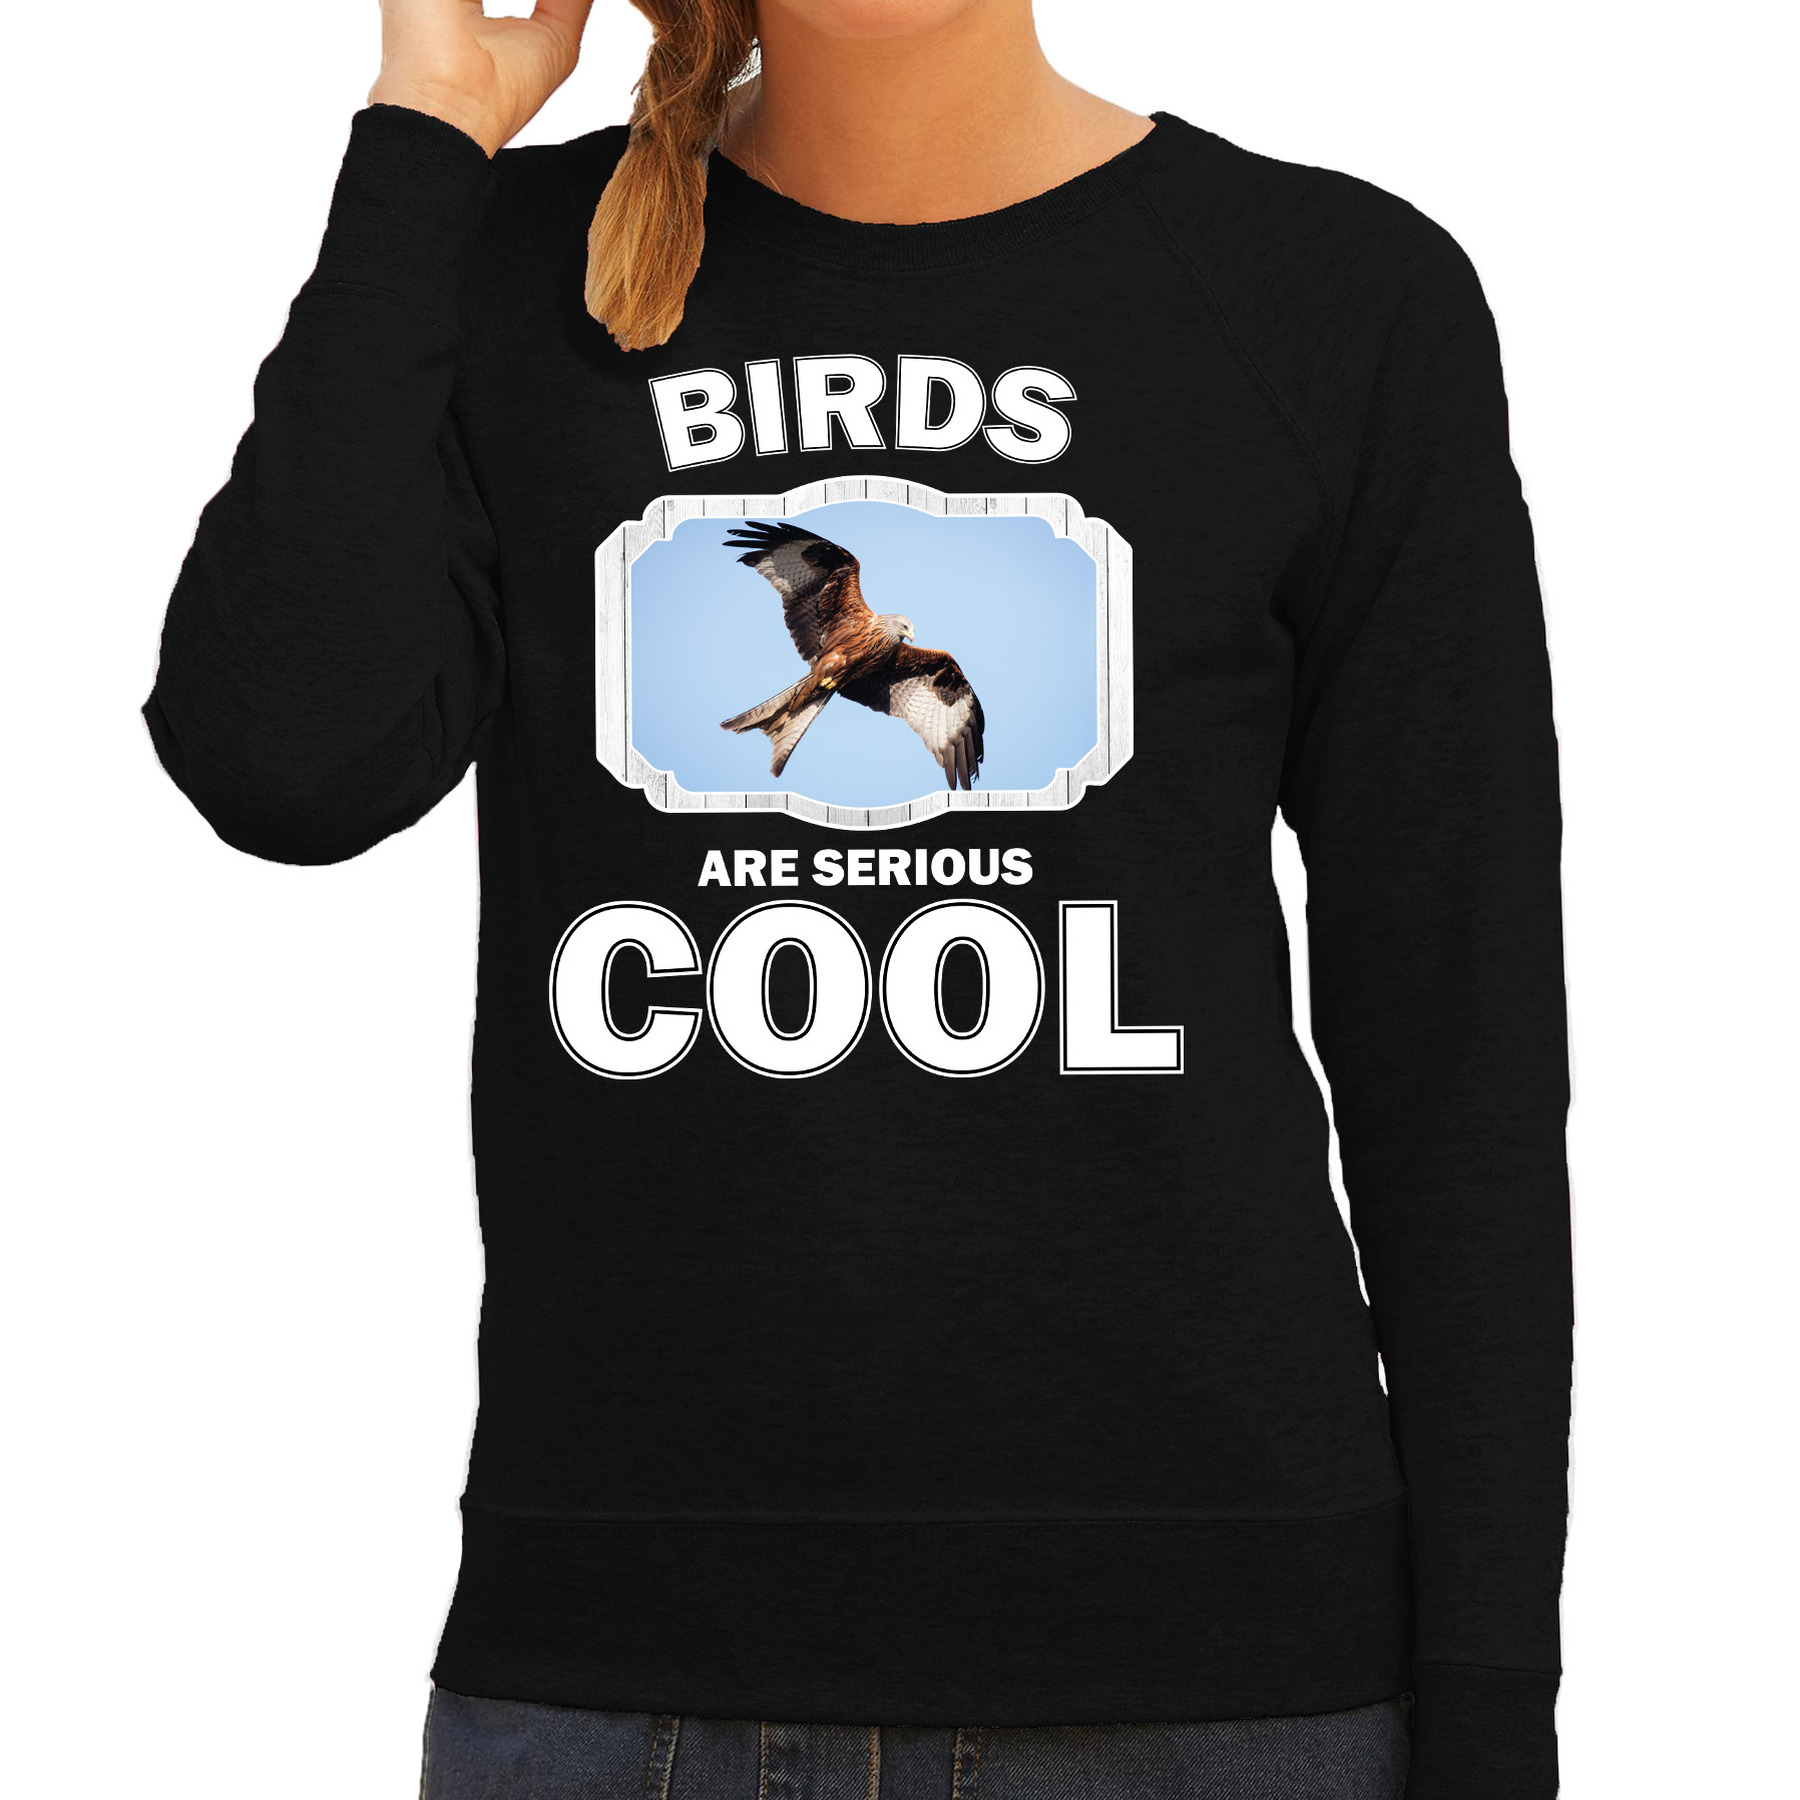 Sweater birds are serious cool zwart dames - arenden/ rode wouw roofvogel trui